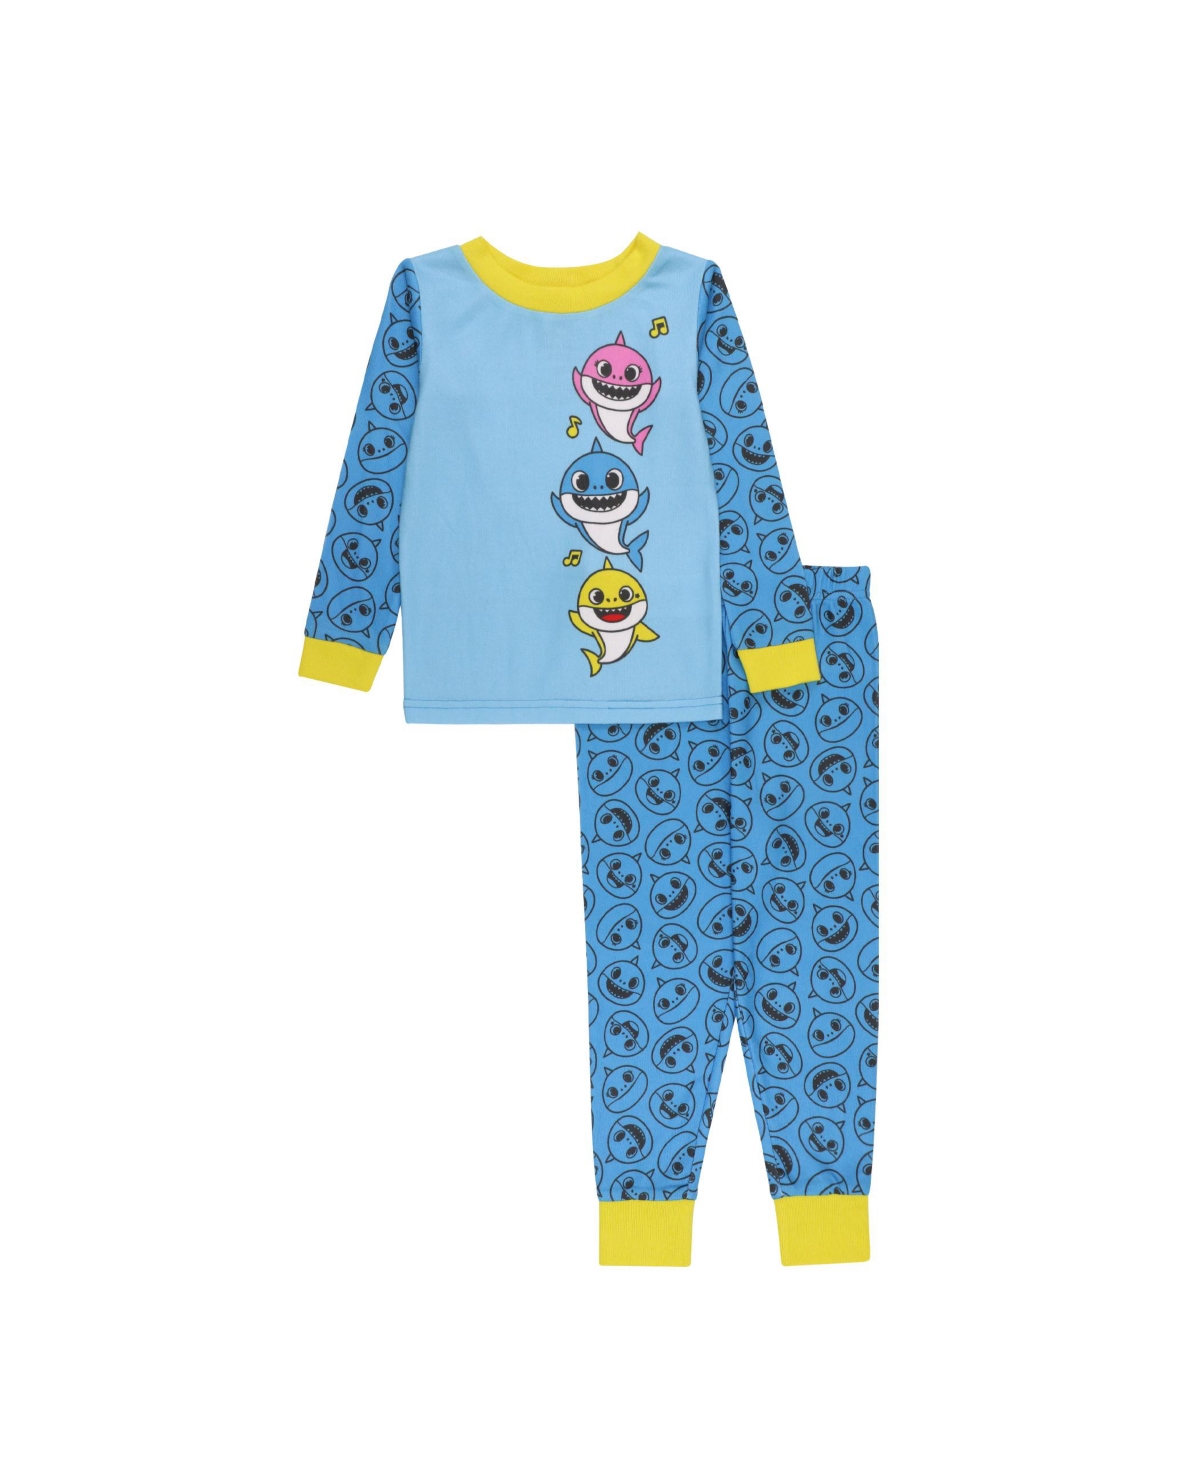 Baby Shark Kids' Toddler Boys Top And Pajama, 2 Piece Set In Assorted